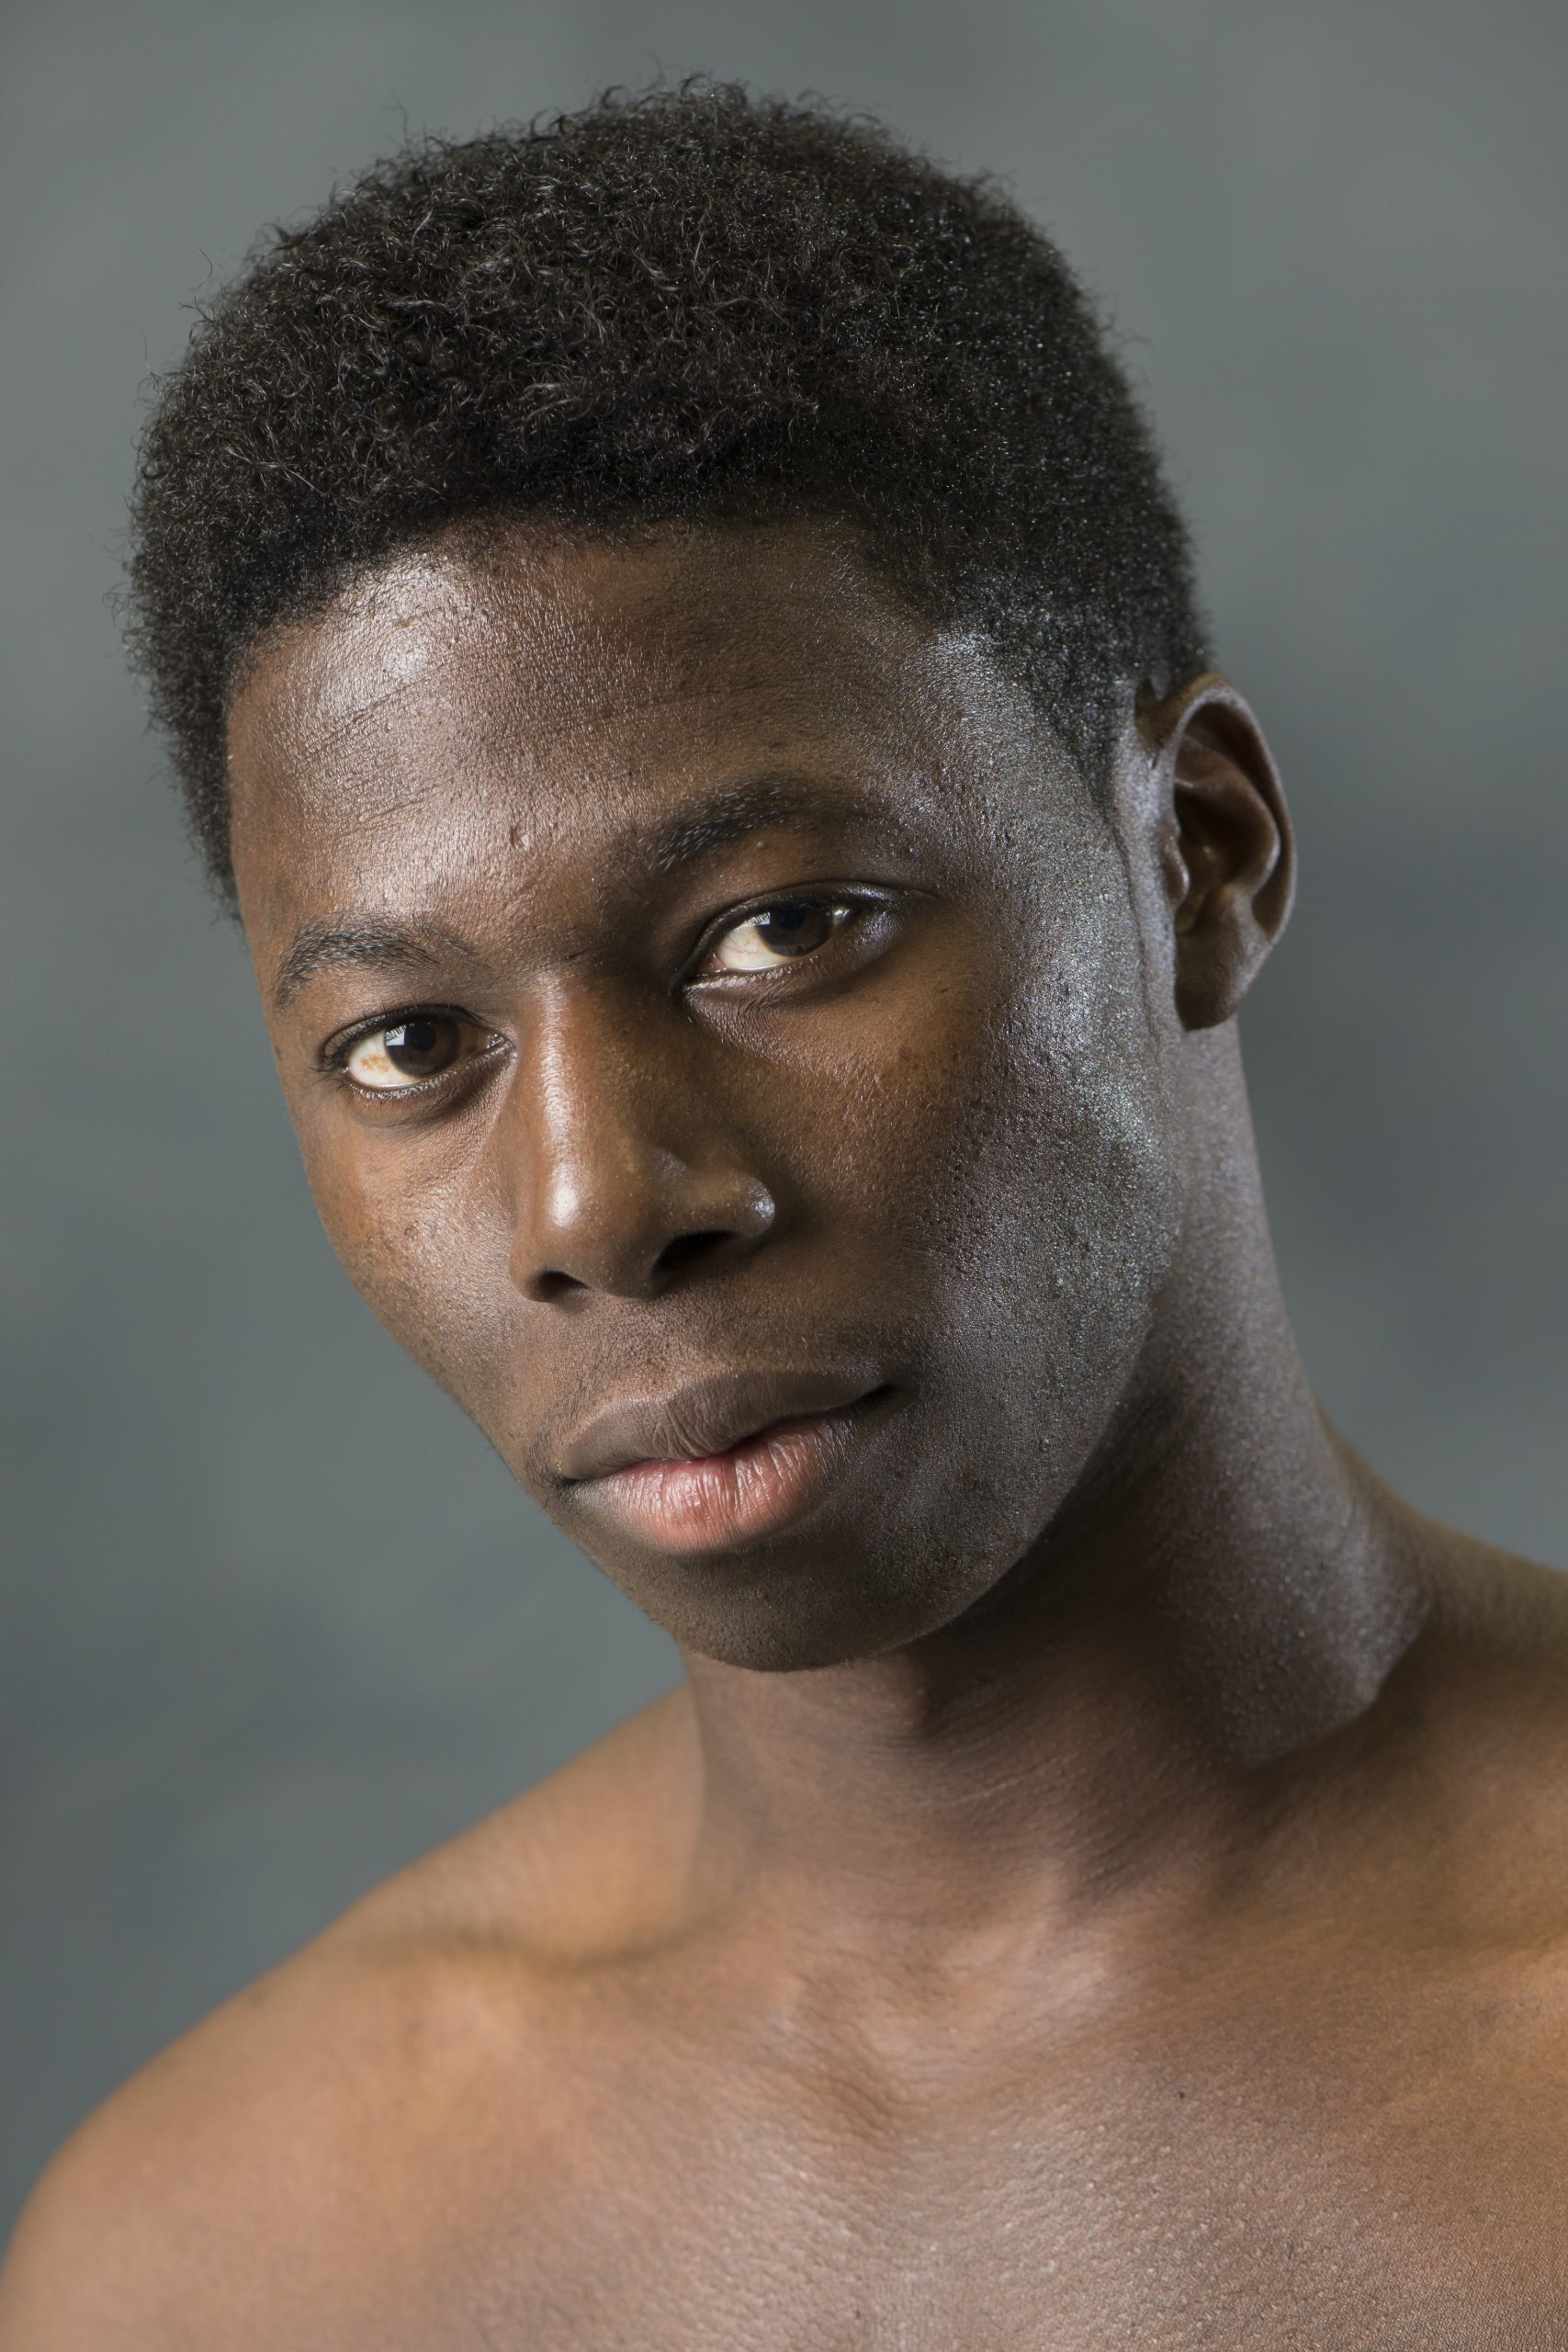 Brooklyn Mack’s love for ballet, plus his talent, athleticism, and hard work, has earned him many opportunities and awards in his amazing career as a ballet dancer, starting at age 12 in Columbia. He now dances through a career that has placed him on the world’s grandest stages. 